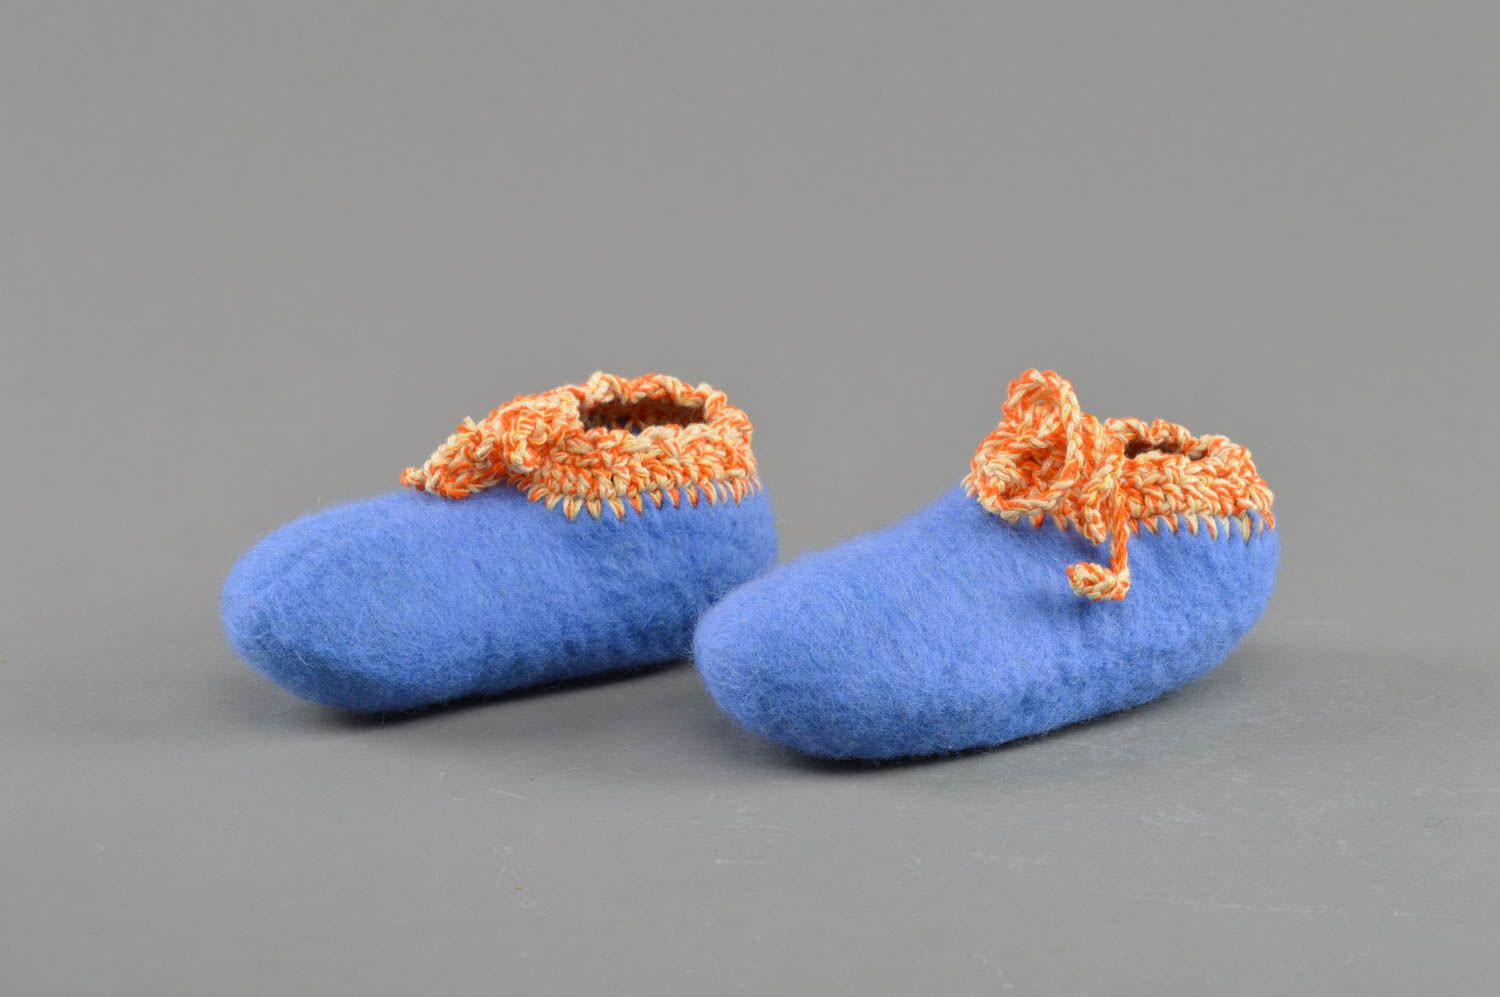 Handmade bright blue felted woolen baby booties with crocheted over edges photo 2